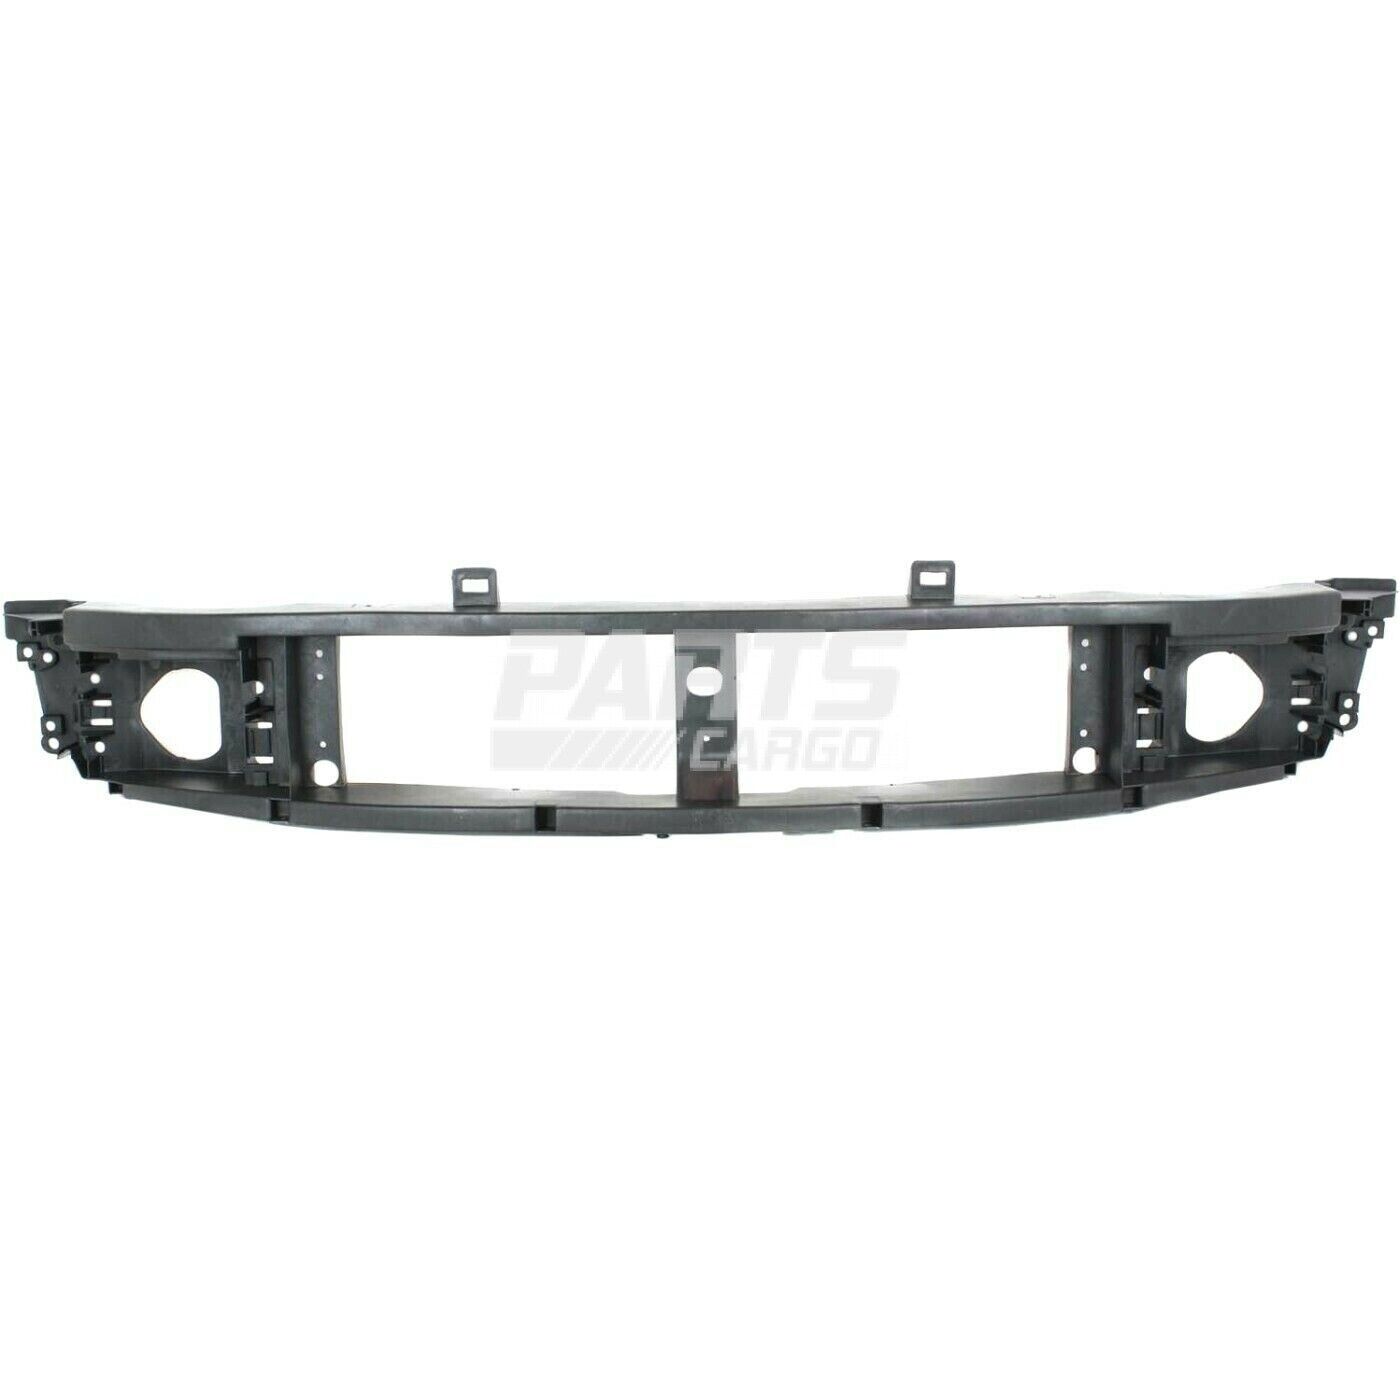 New Fits 1997-2004 Ford F-Series FO1220210 Header Panel Grille Mounting Panel